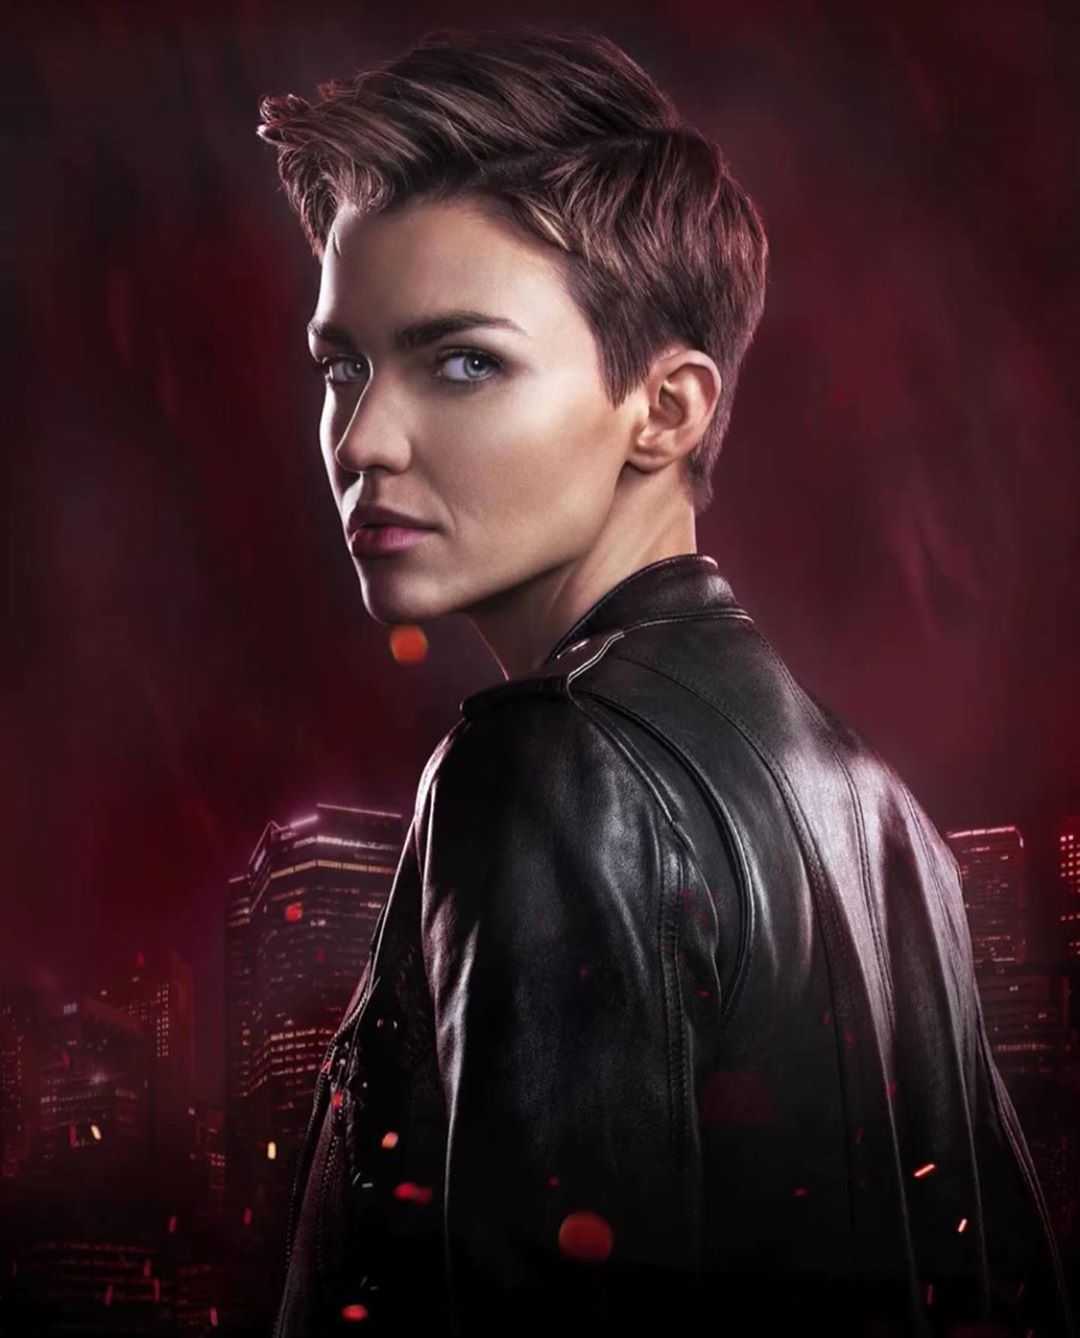 70+ Hot Pictures Of Ruby Rose – Batgirl In Arrowverse And Orange Is The New Black Star. 101